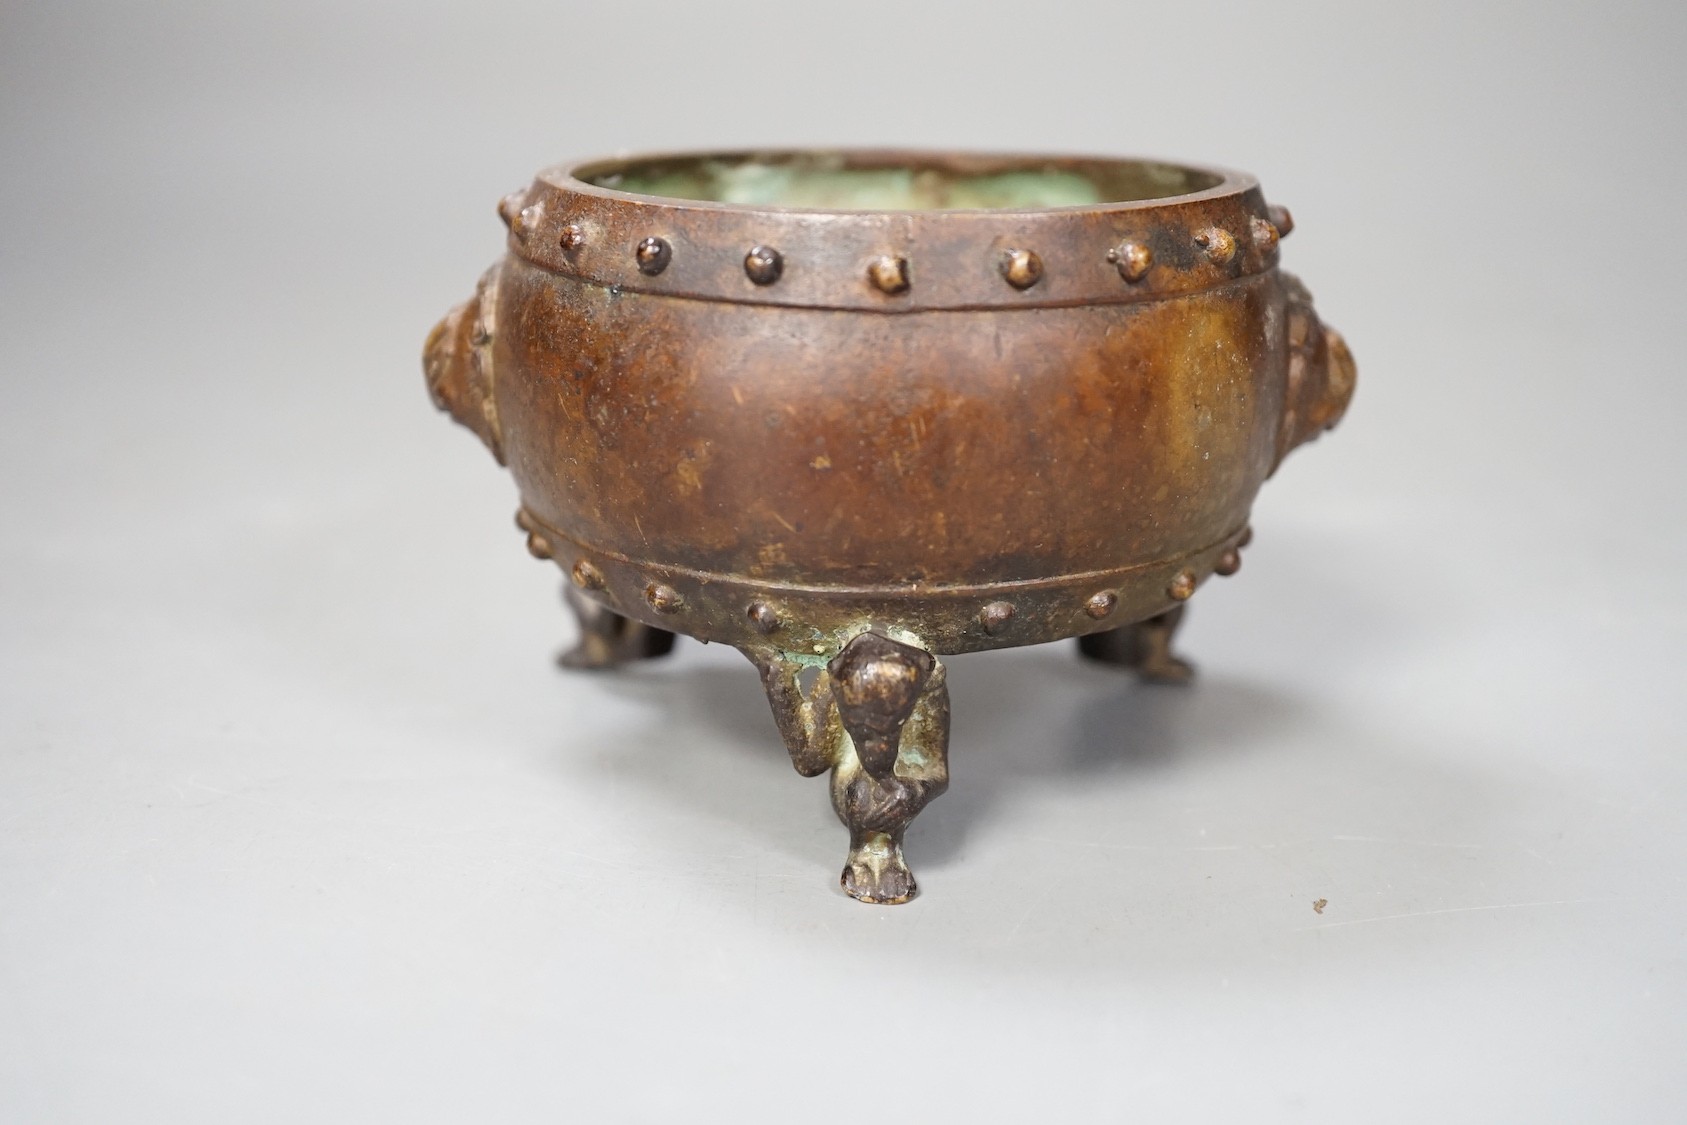 A Chinese bronze tripod censer, Xuande mark - 7cm tall